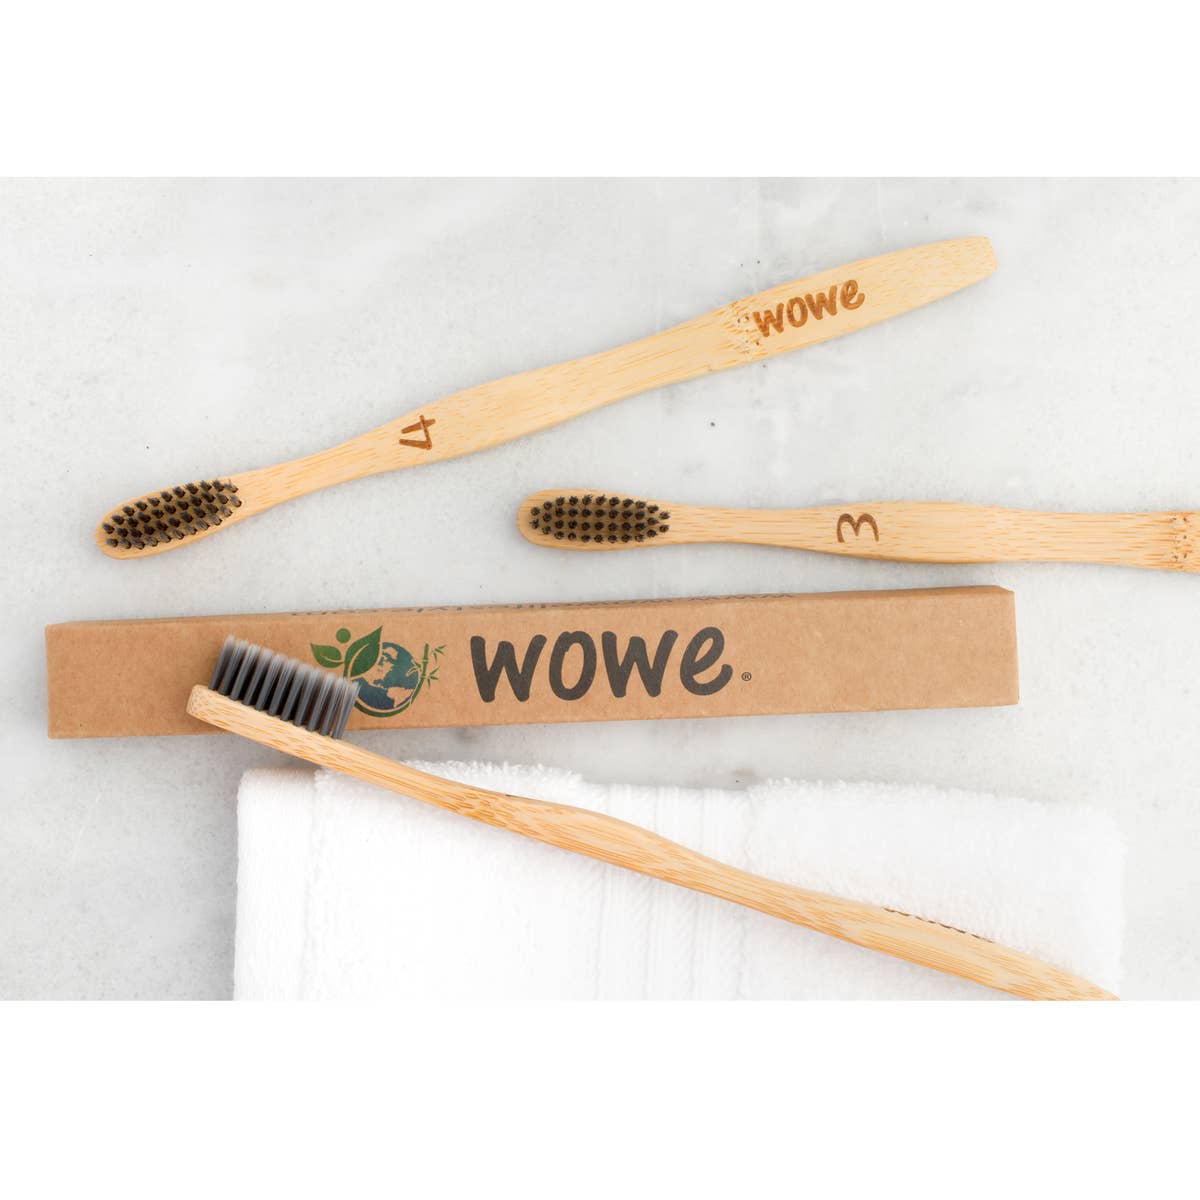 Wowe | Charcoal Infused Bristle Bamboo Toothbrush, Tooth Brushes, Wowe, Defiance Outdoor Gear Co.